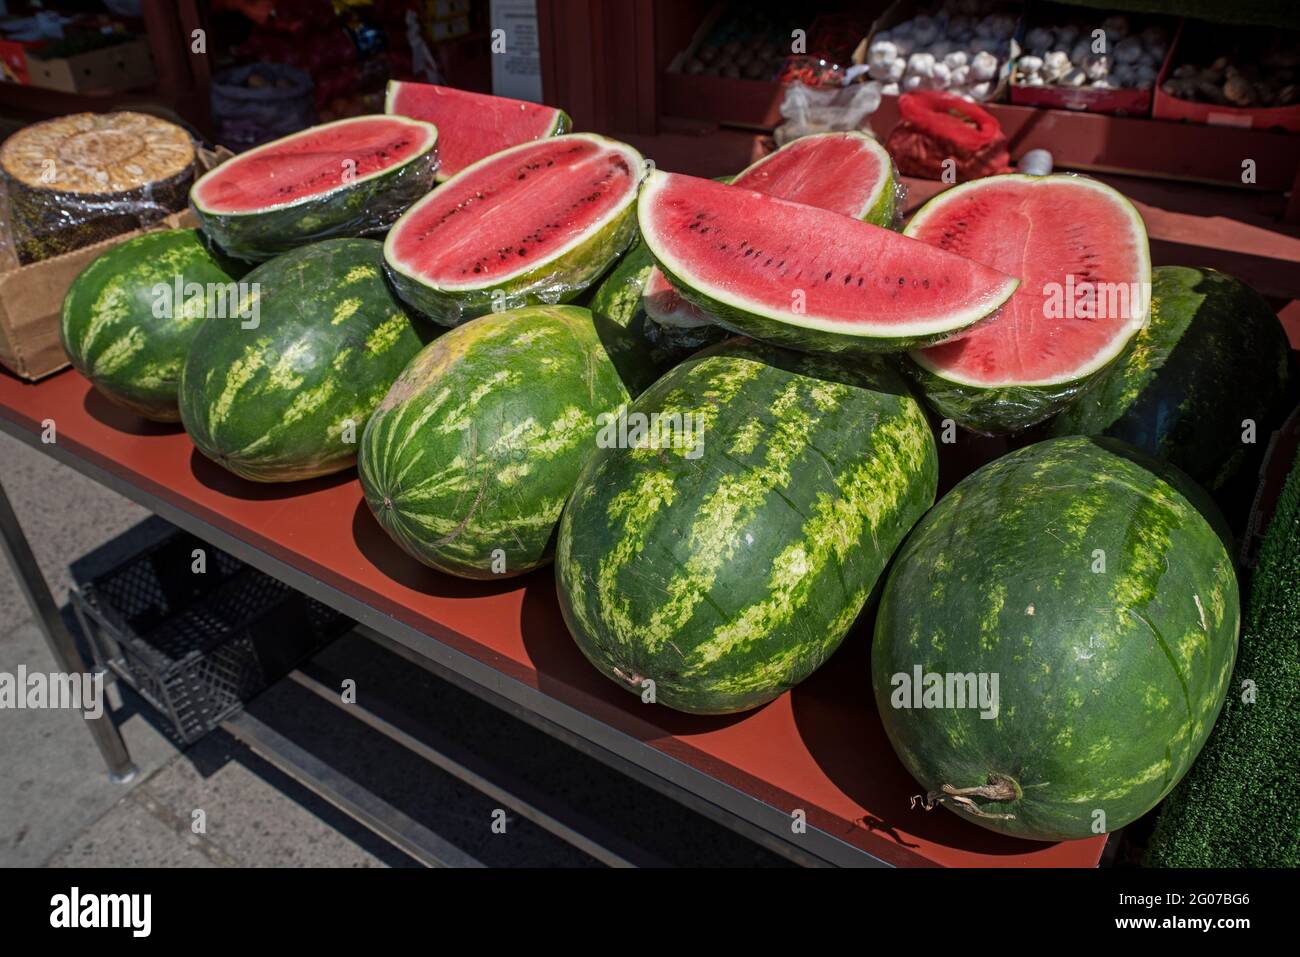 Display of watermelons on sale outside of a greengrocer's shop in Newington, Edinburgh, Scotland, UK. Stock Photo